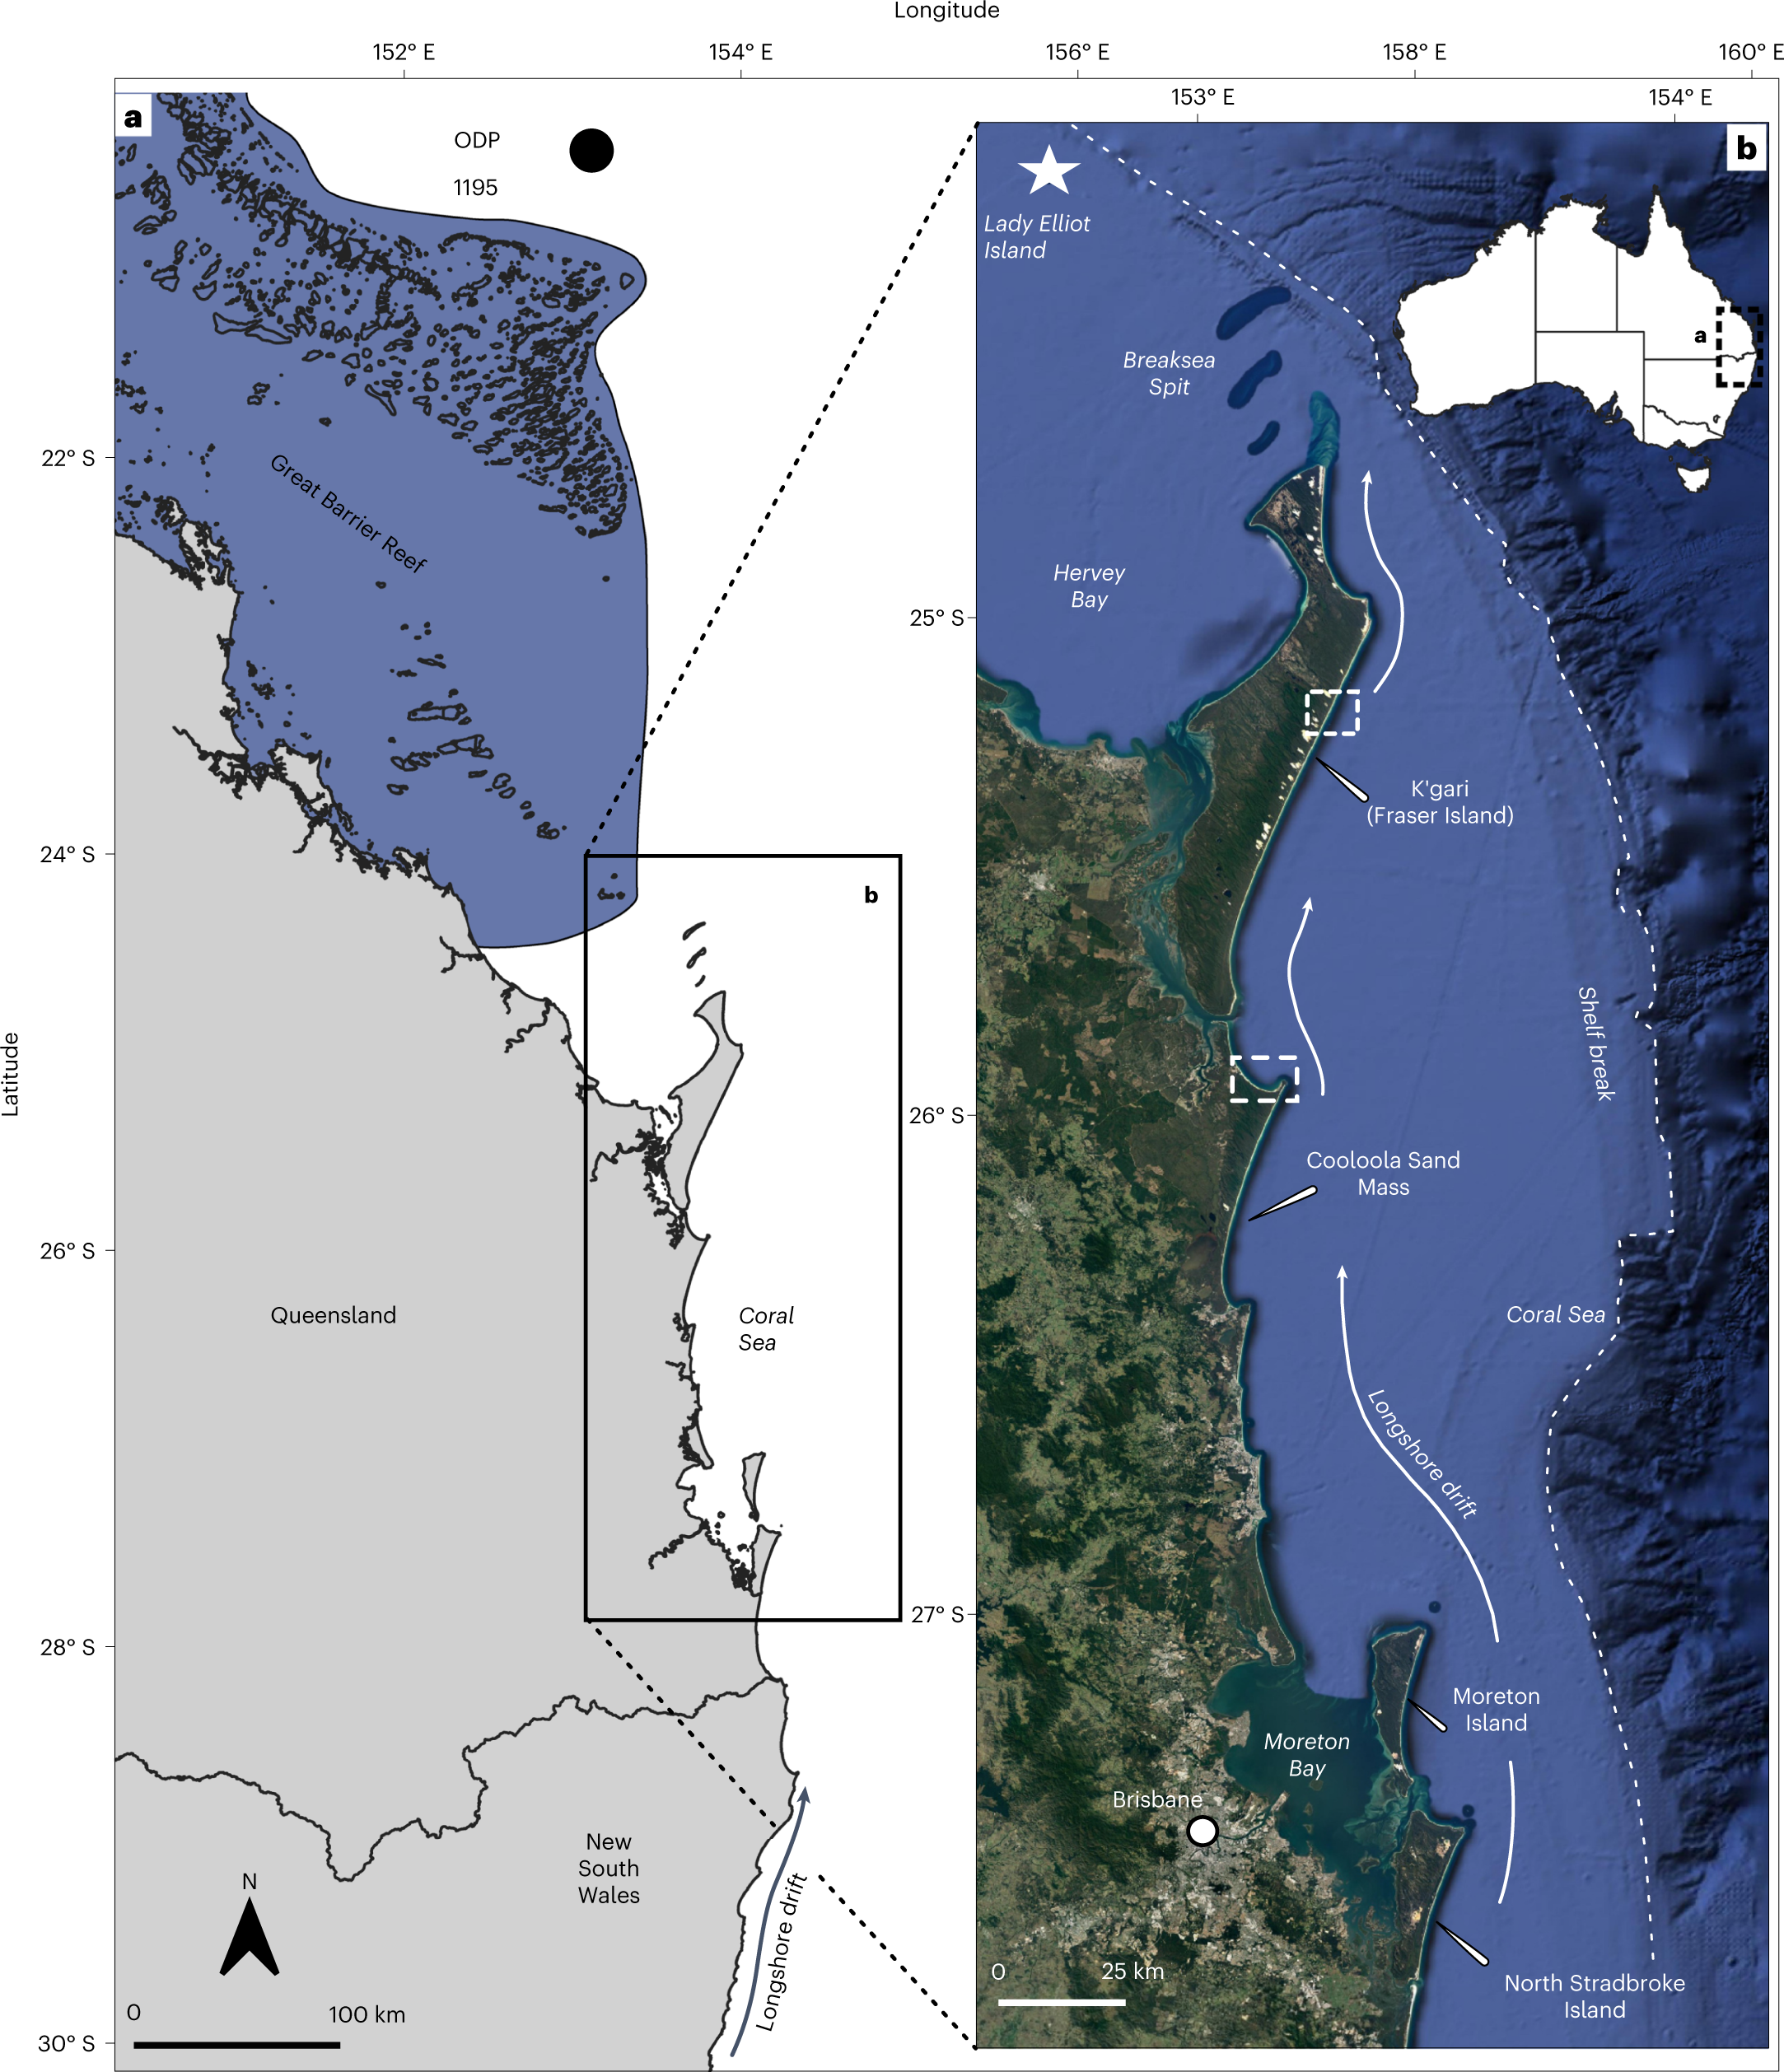 Fraser Island (K'gari) and initiation of the Great Barrier Reef linked by  Middle Pleistocene sea-level change | Nature Geoscience